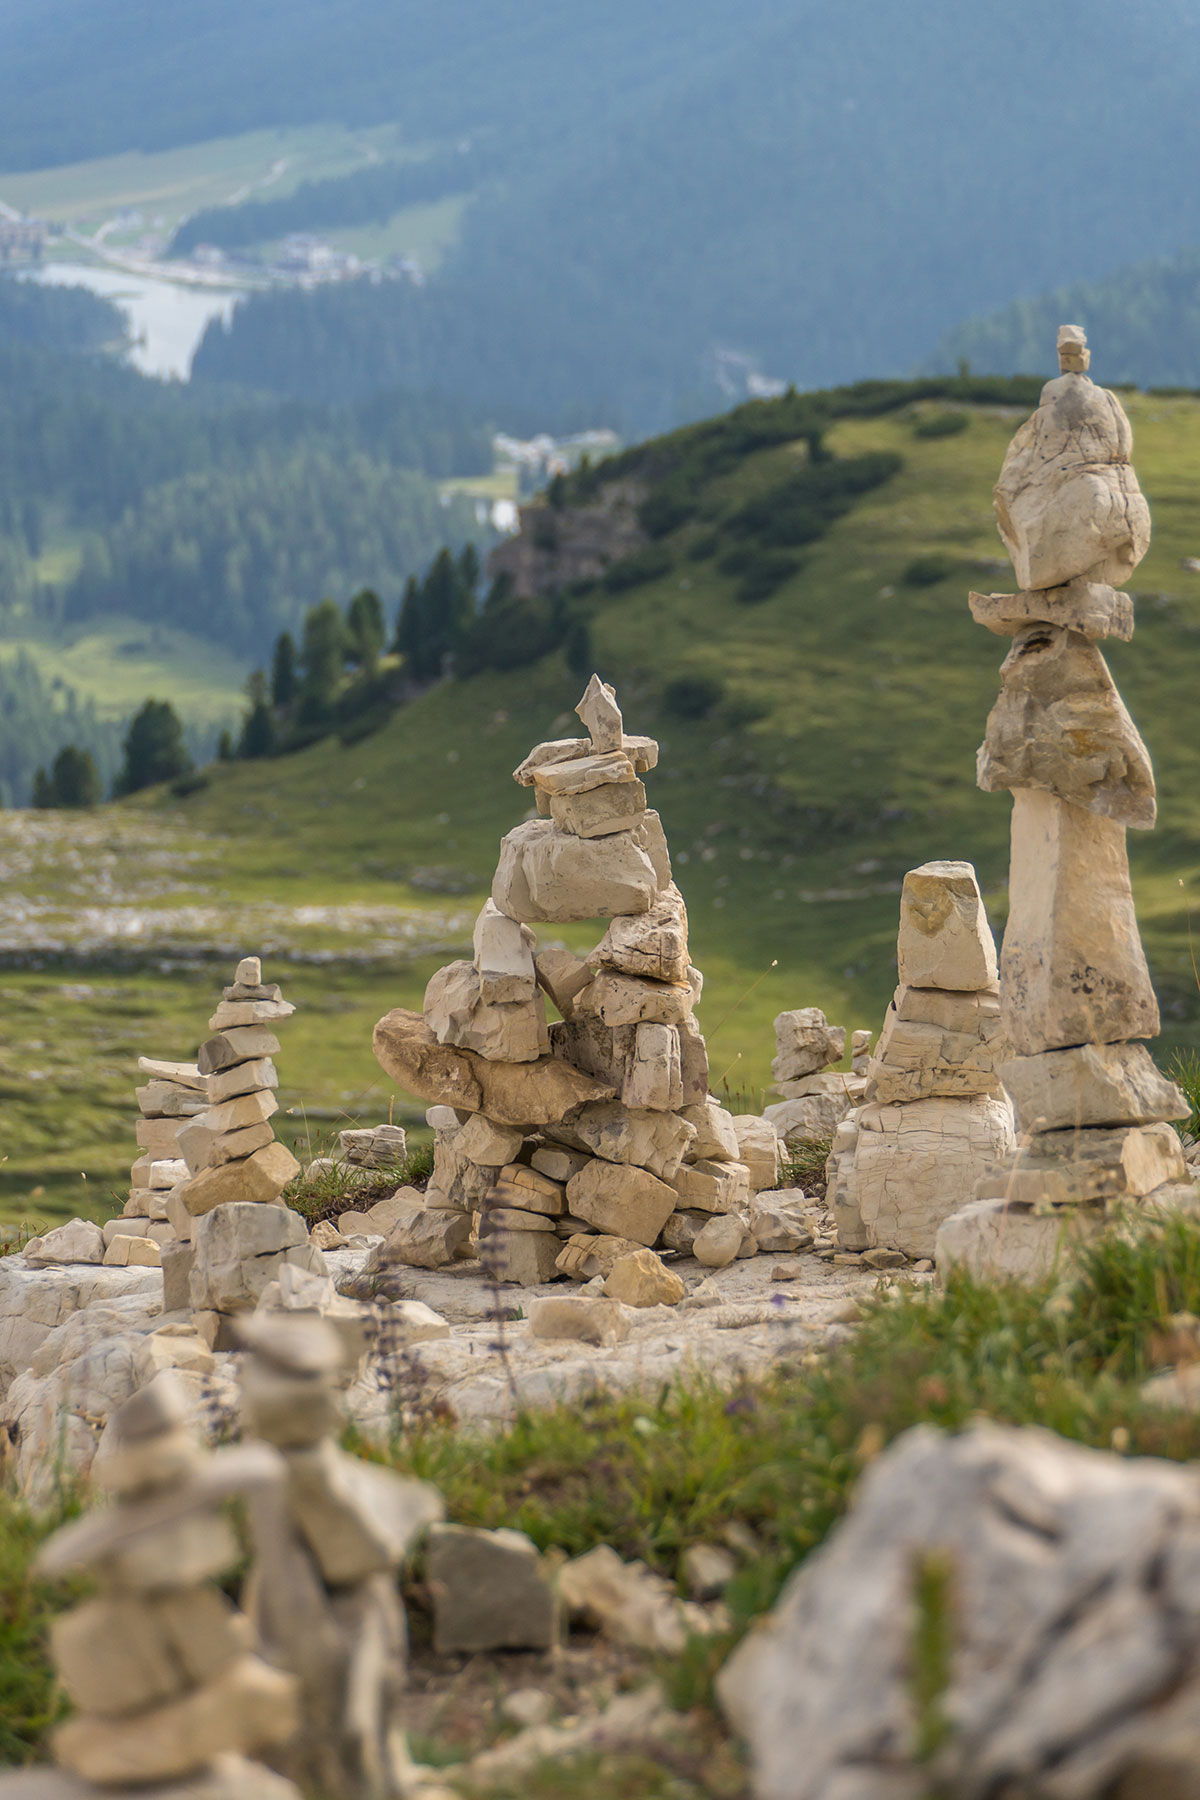 Cairn at the base of the Three Peaks Dolomites, Italy - 